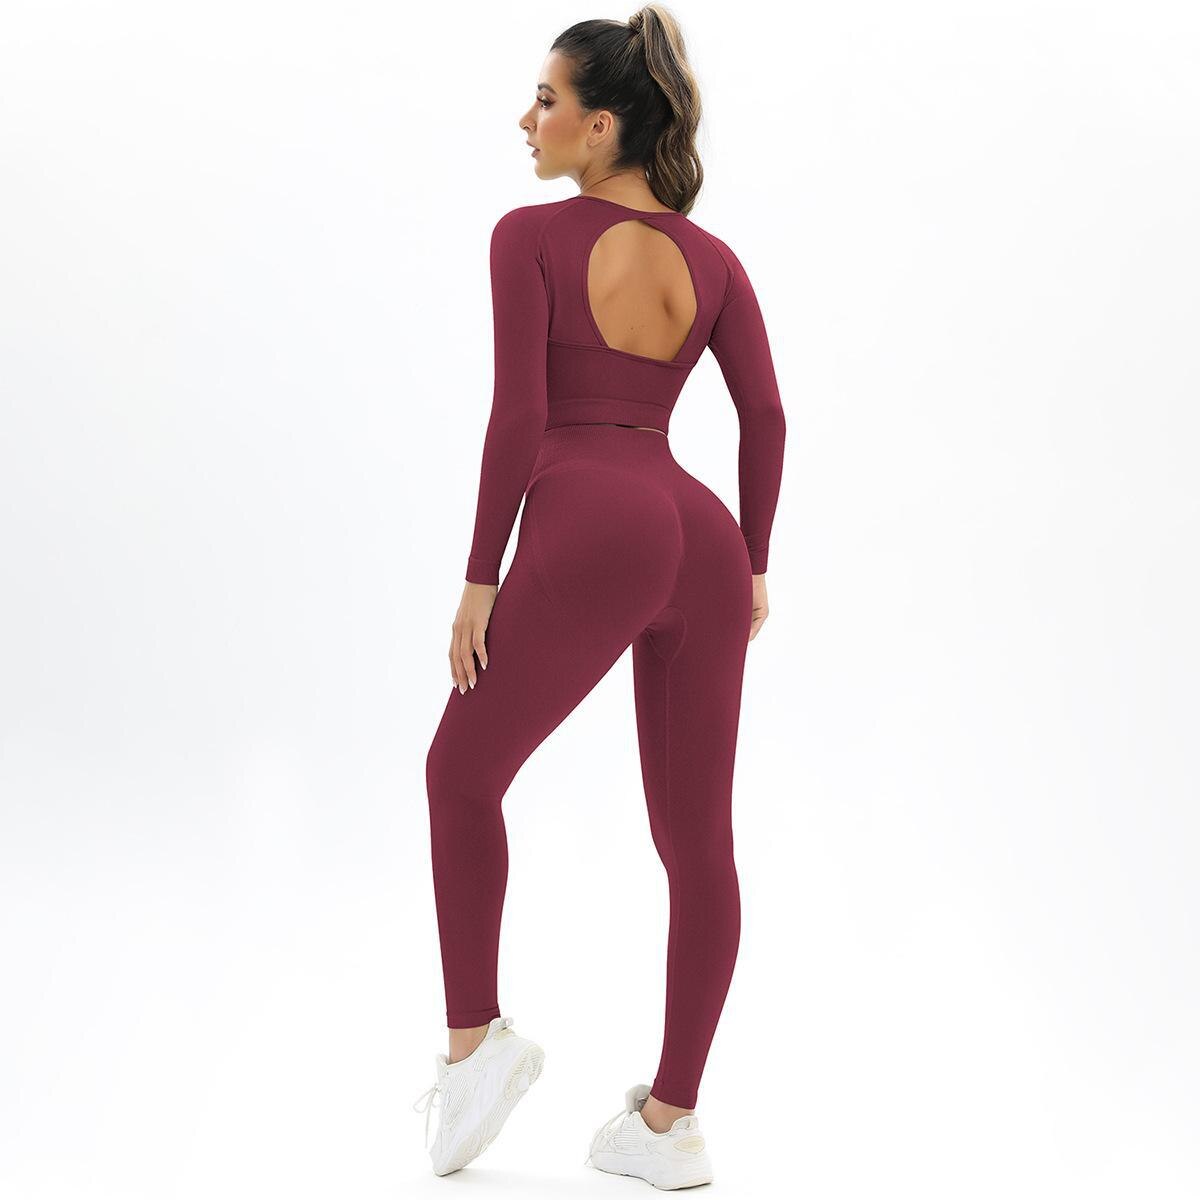 2-Pieces-Yoga-Sets-Sport-Femme-Activewear-Set-Girls-Seamless-Fitness-Suit-Workout-Clothes-Athletic-Wear-3